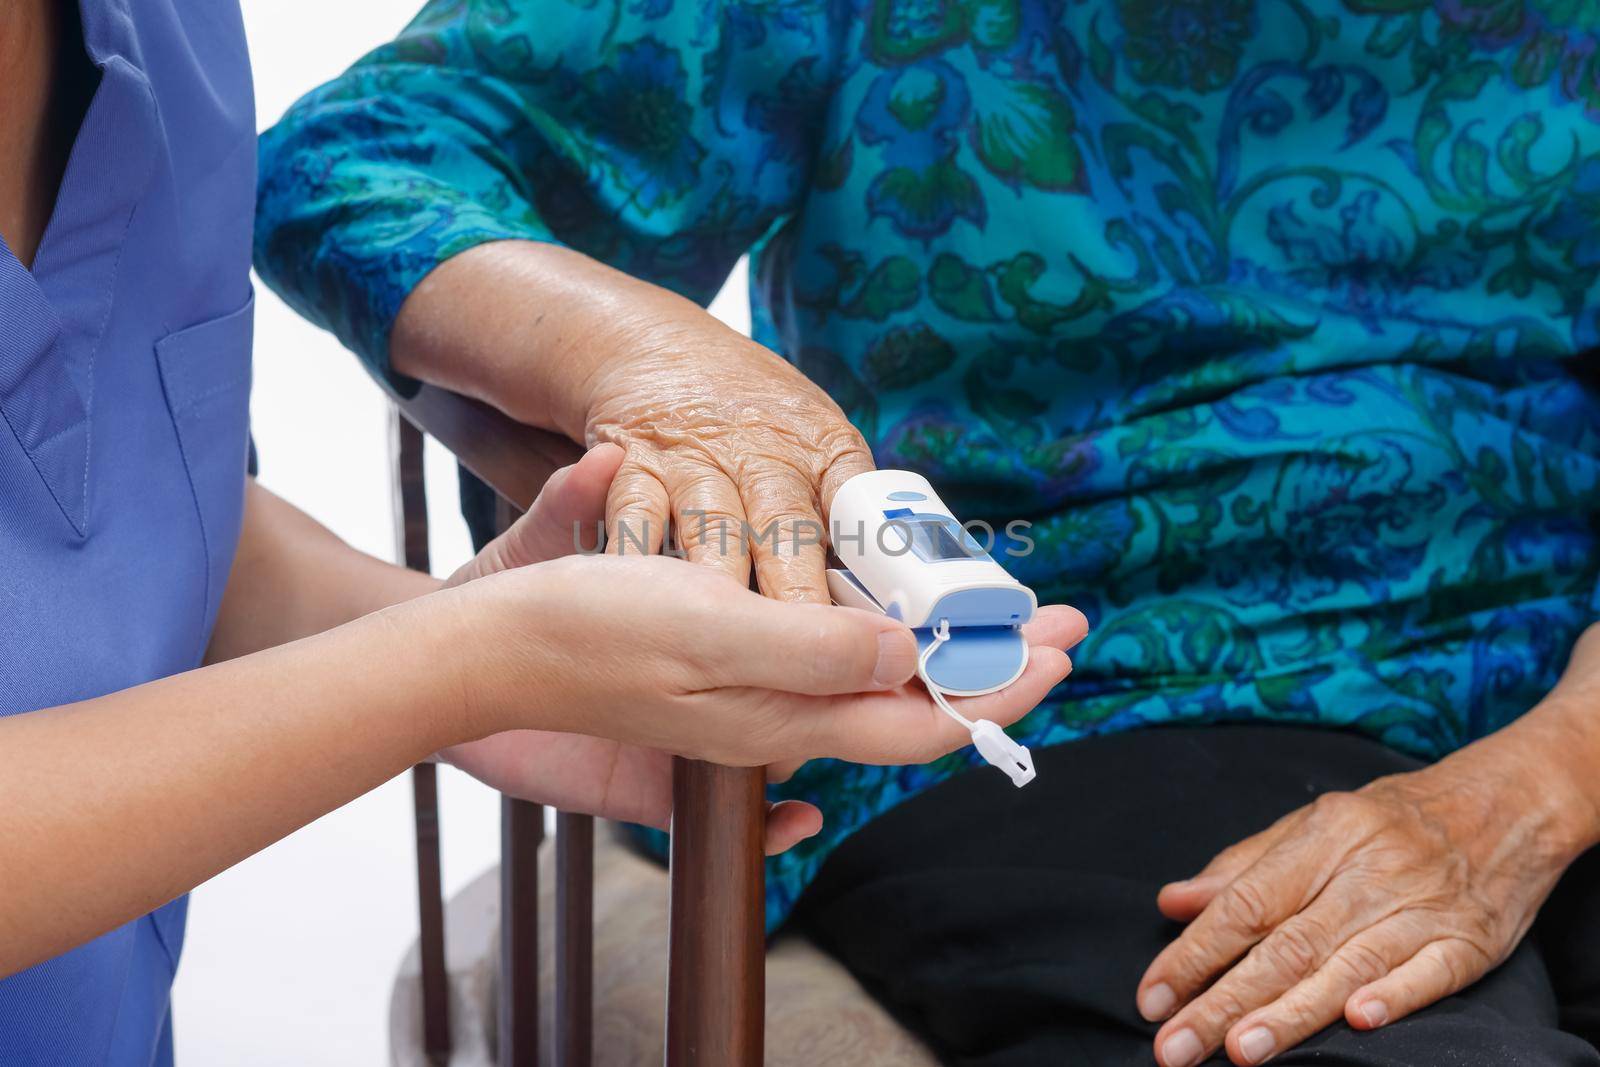 Caregiver monitoring oxygen saturation at fingertip of elderly woman. by toa55